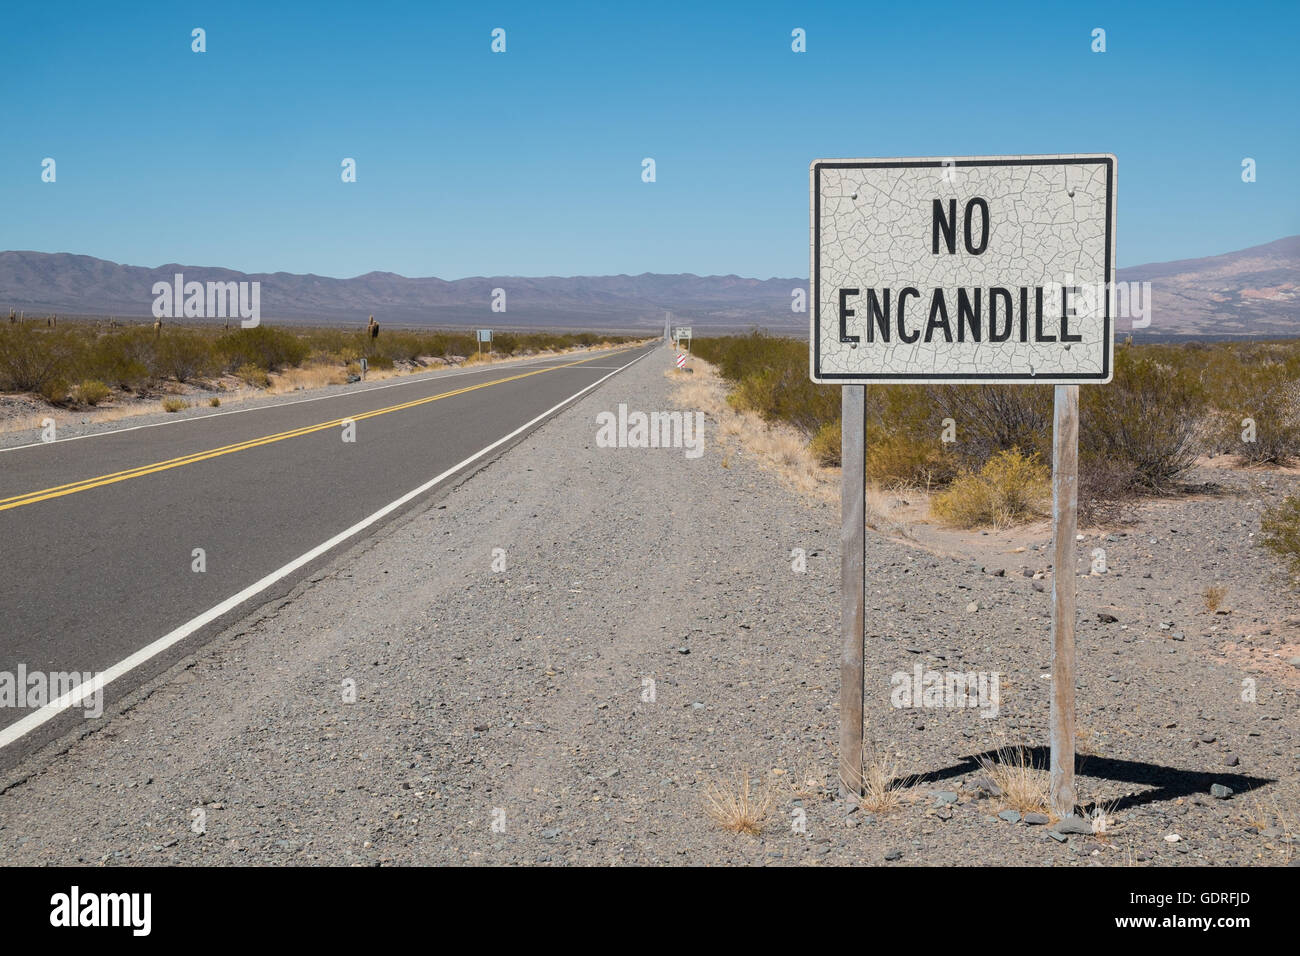 Andean road with Spanish traffic sign advising 'not to use hig beam' Stock Photo